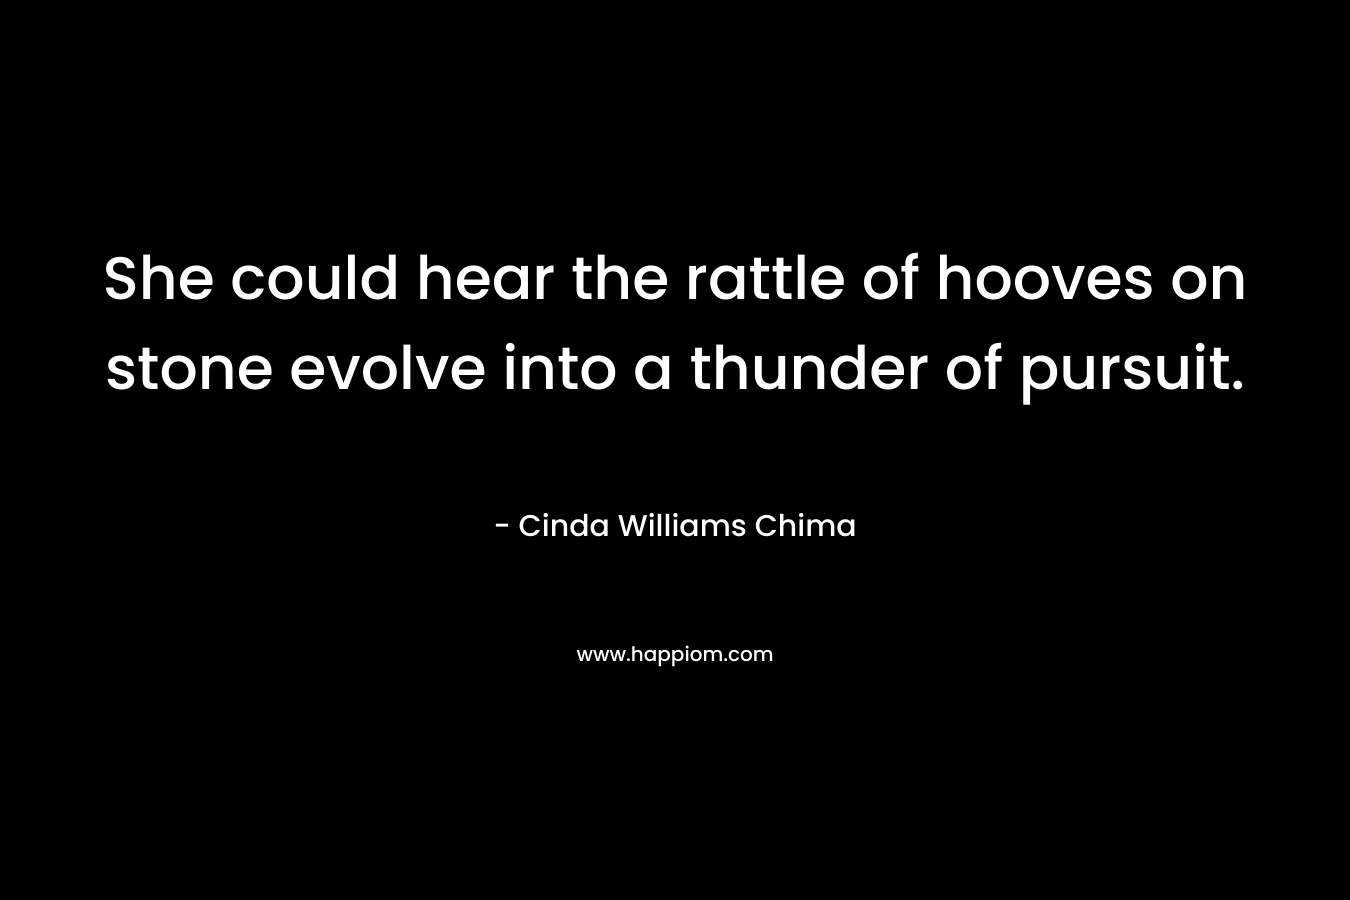 She could hear the rattle of hooves on stone evolve into a thunder of pursuit. – Cinda Williams Chima